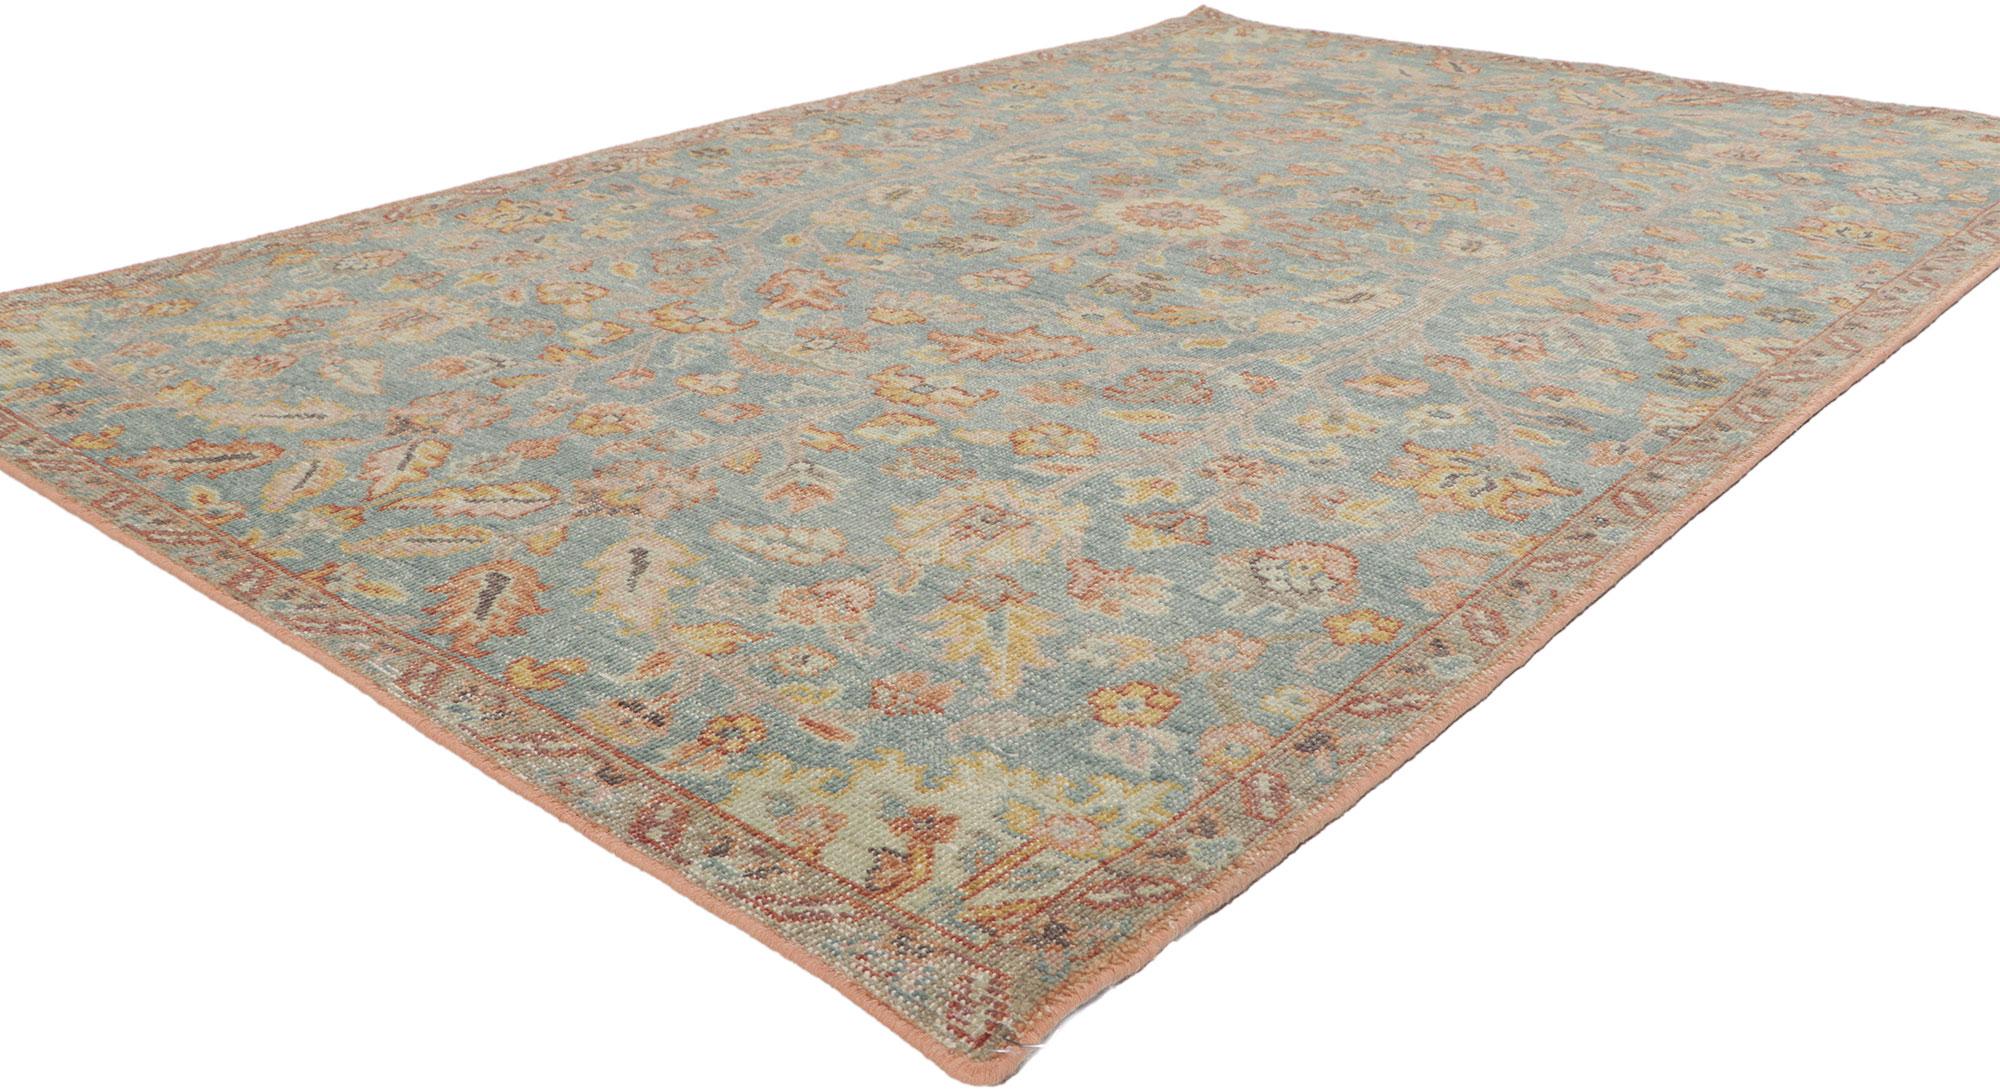 30785 new modern distressed rug with vintage style, 05'03 x 07'11. Emanating sophistication and rustic sensibility combined with nostalgic charm, this new contemporary distressed rug creates an inimitable warmth and calming ambiance. The botanical